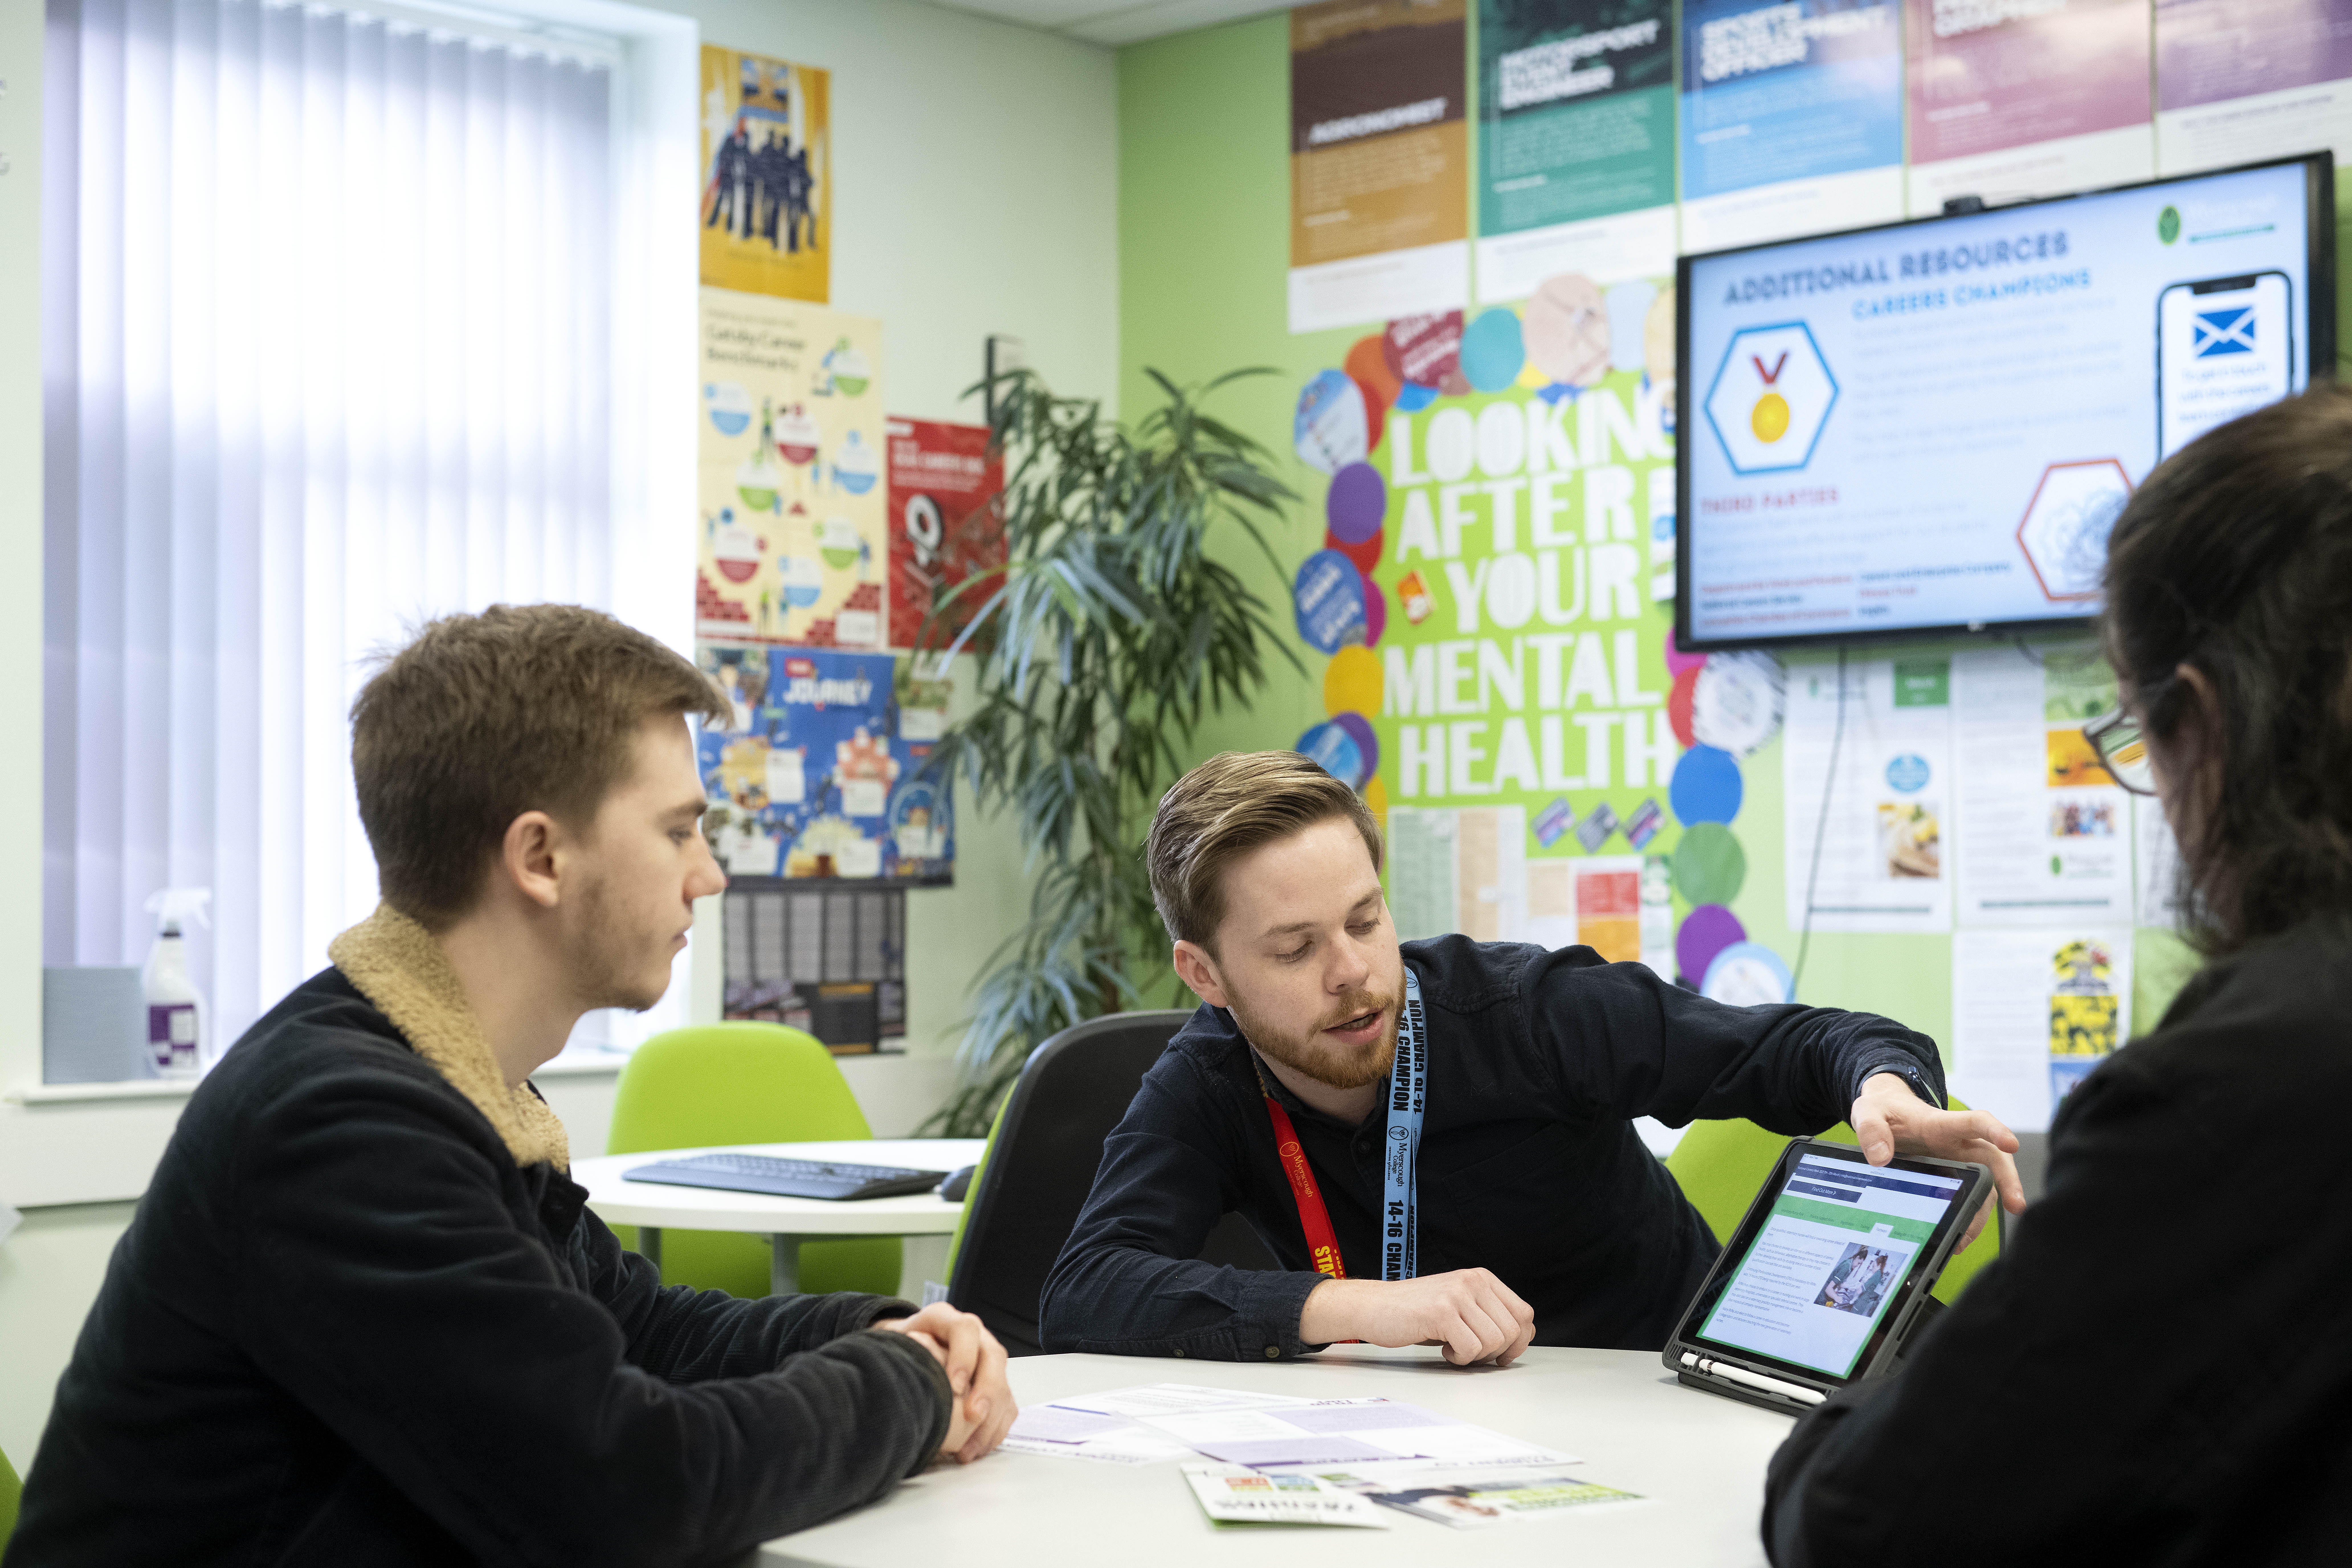 A Myerscough College careers advisor supervising a student